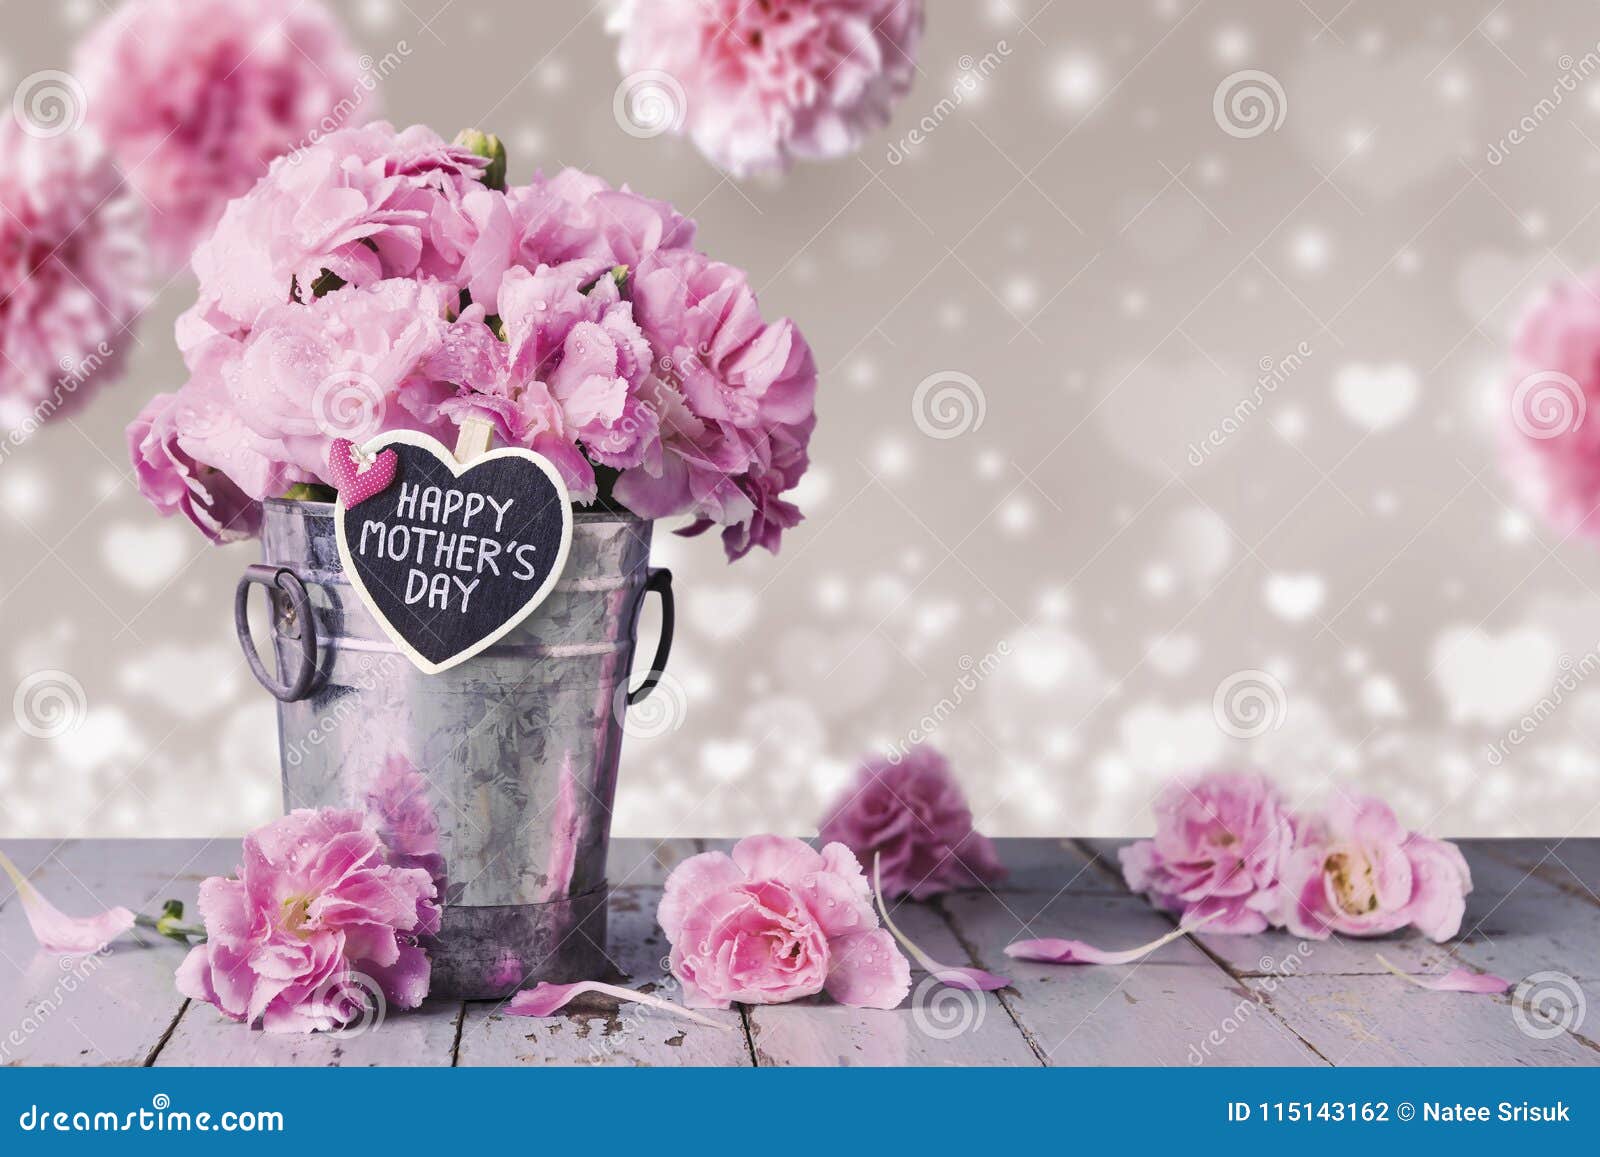 happy mothers day letter on wood heart and pink carnation flower